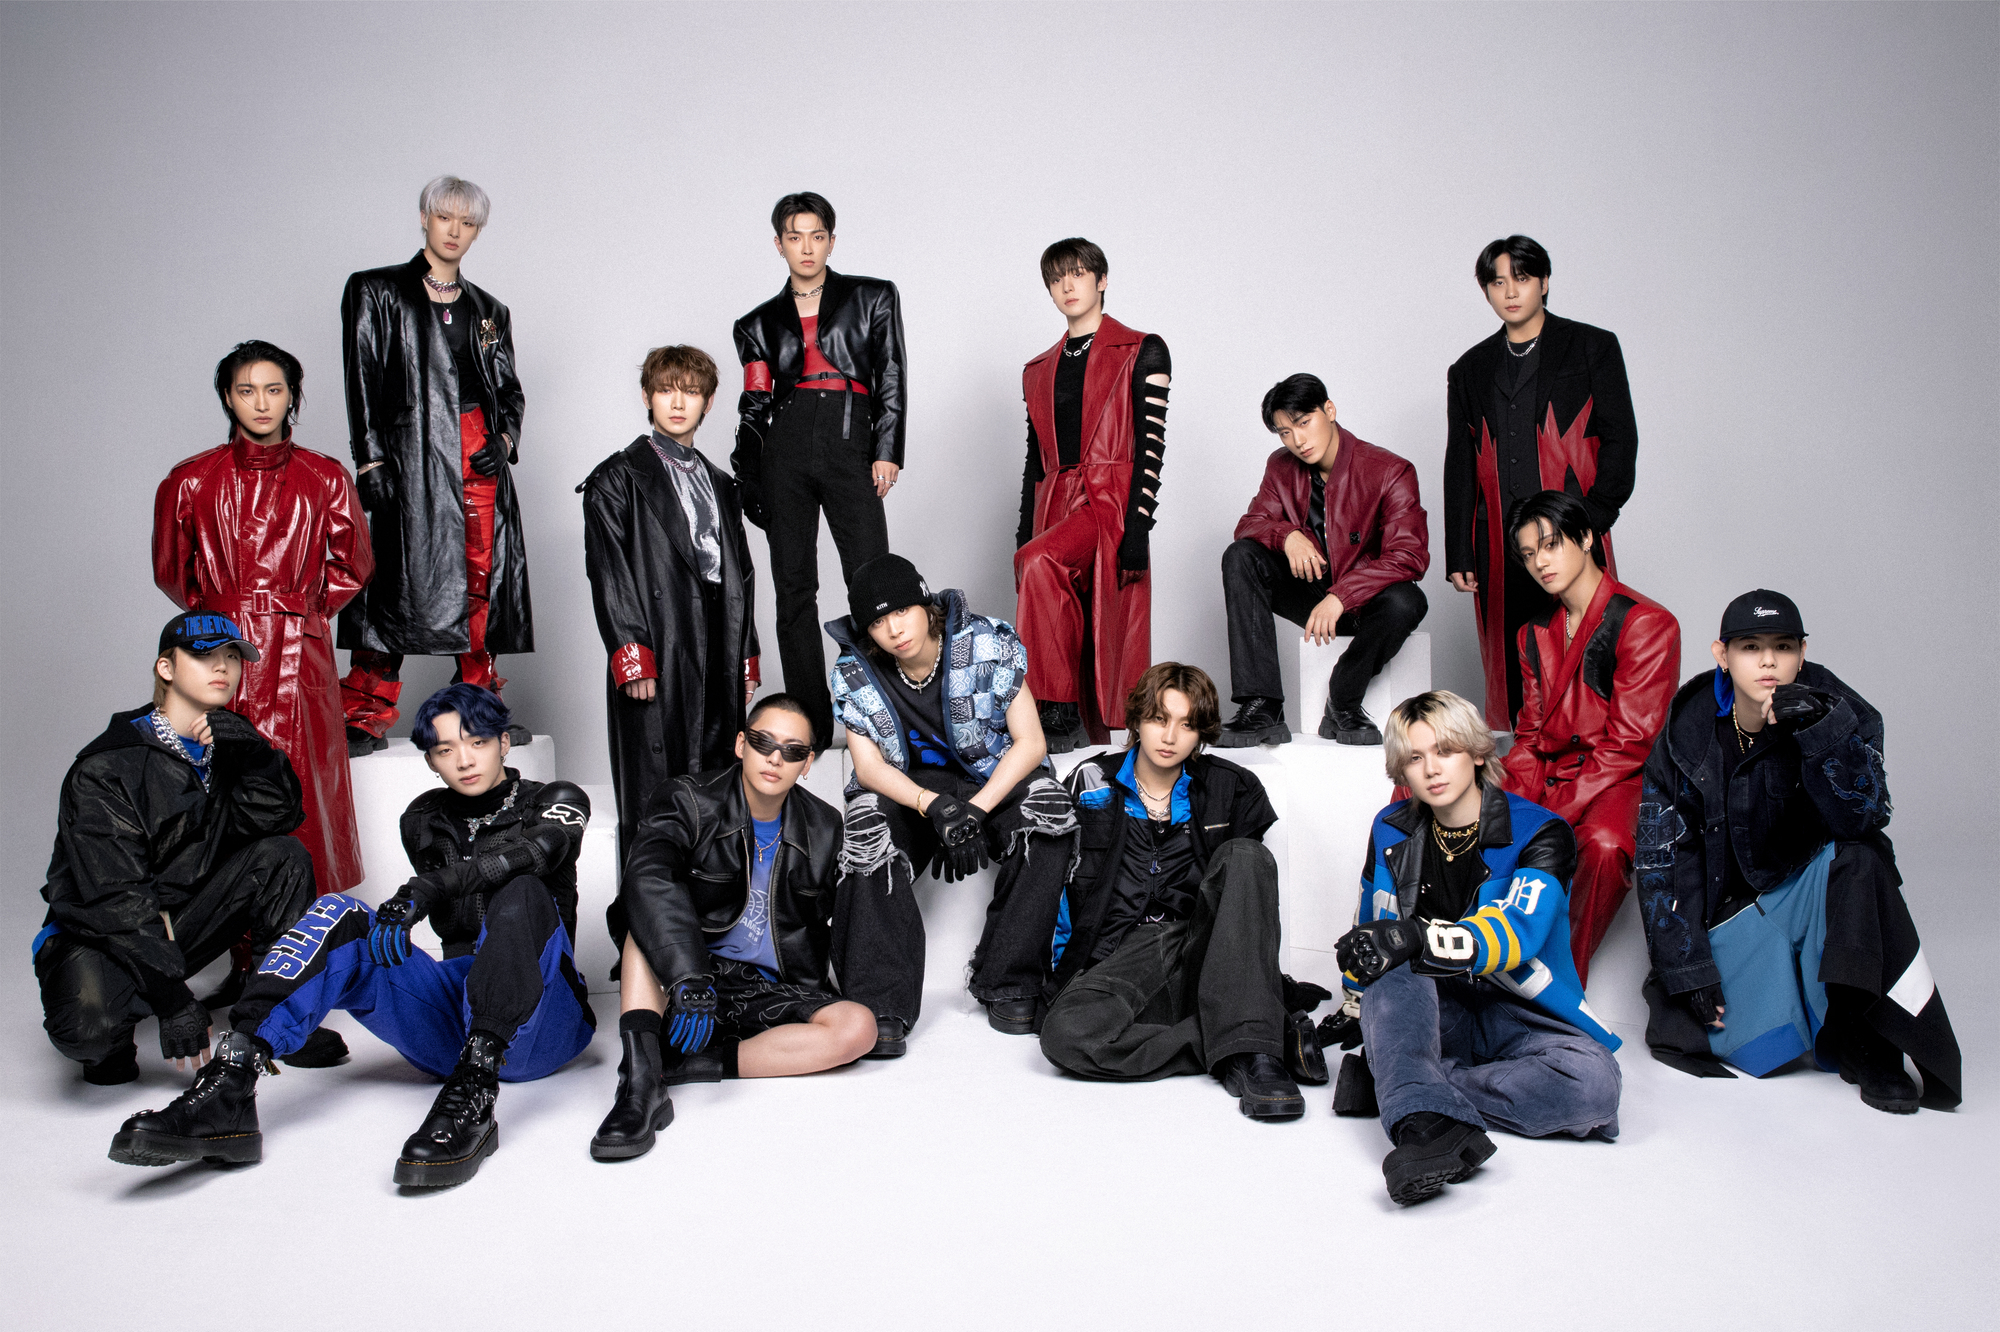 BE:FIRST X ATEEZによる'Hush-Hush'が7月1日(月)に配信リリース決定！ | ATEEZ JAPAN OFFICIAL SITE